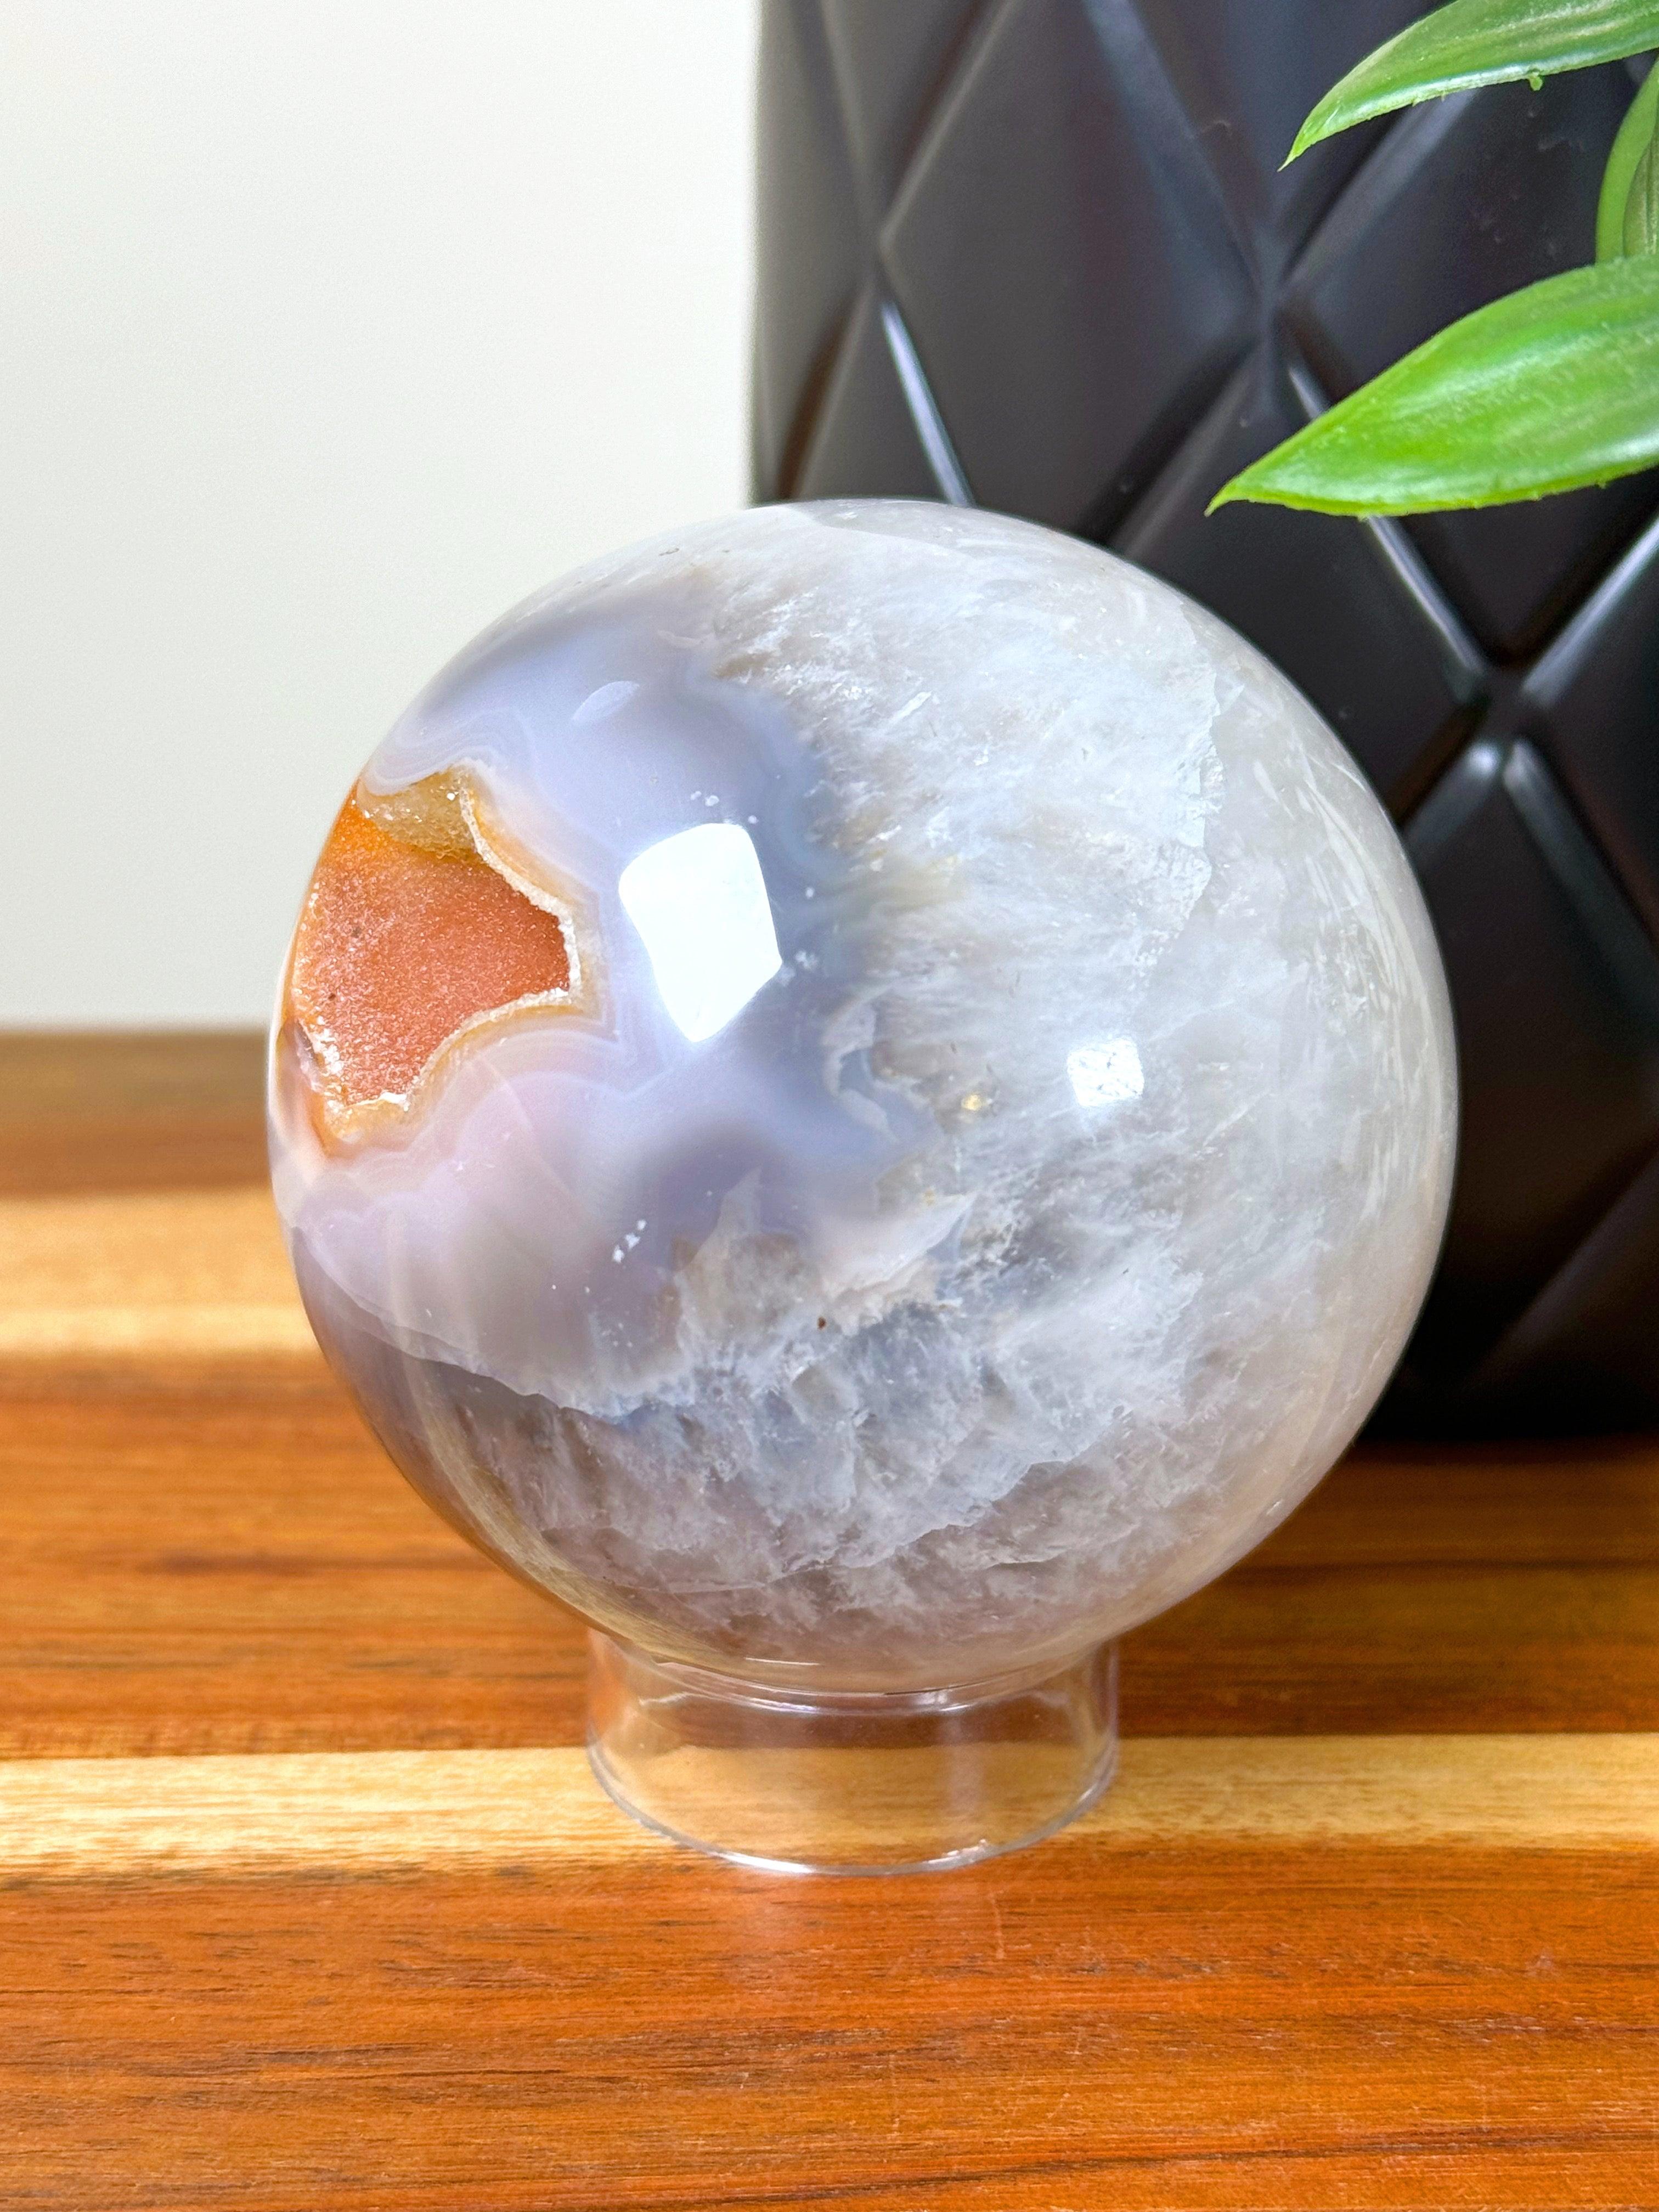 DRUZY AGATE SPHERE 17 - agate, druzy agate, googly agate, googly eye, googly eye agate, one of a kind, sphere, statement piece - The Mineral Maven